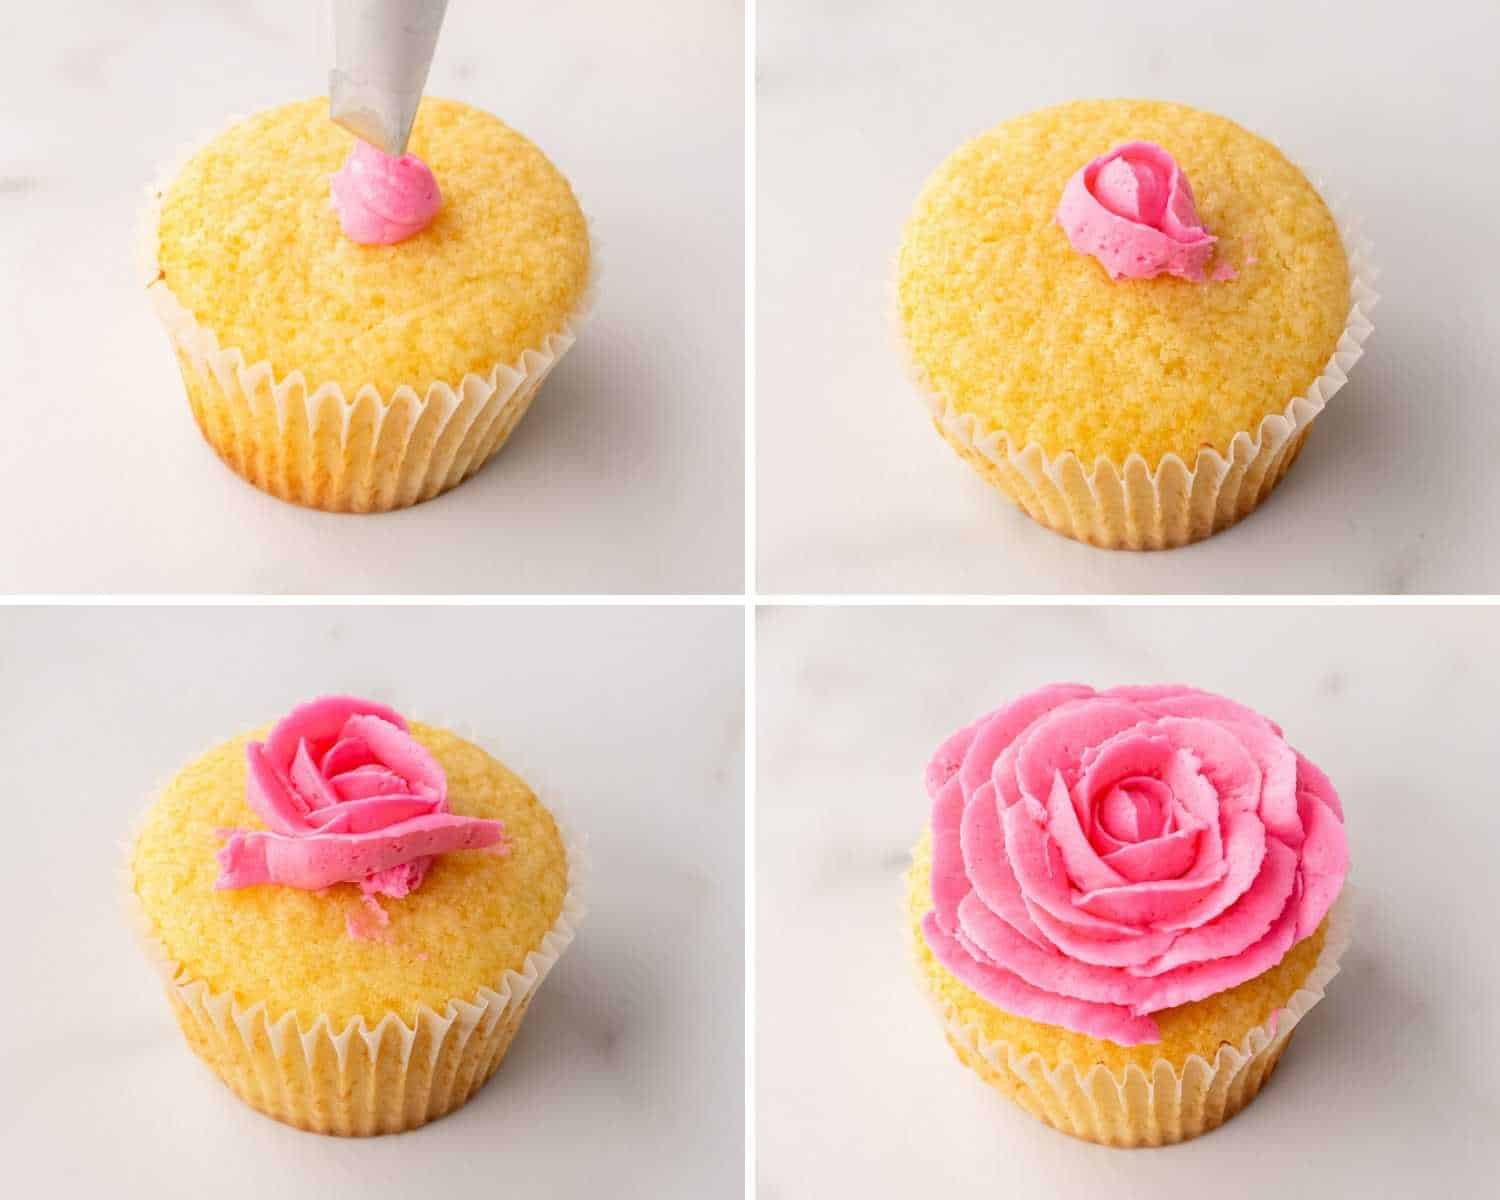 Collage of four images showing how to pipe a buttercream rose on a cupcake